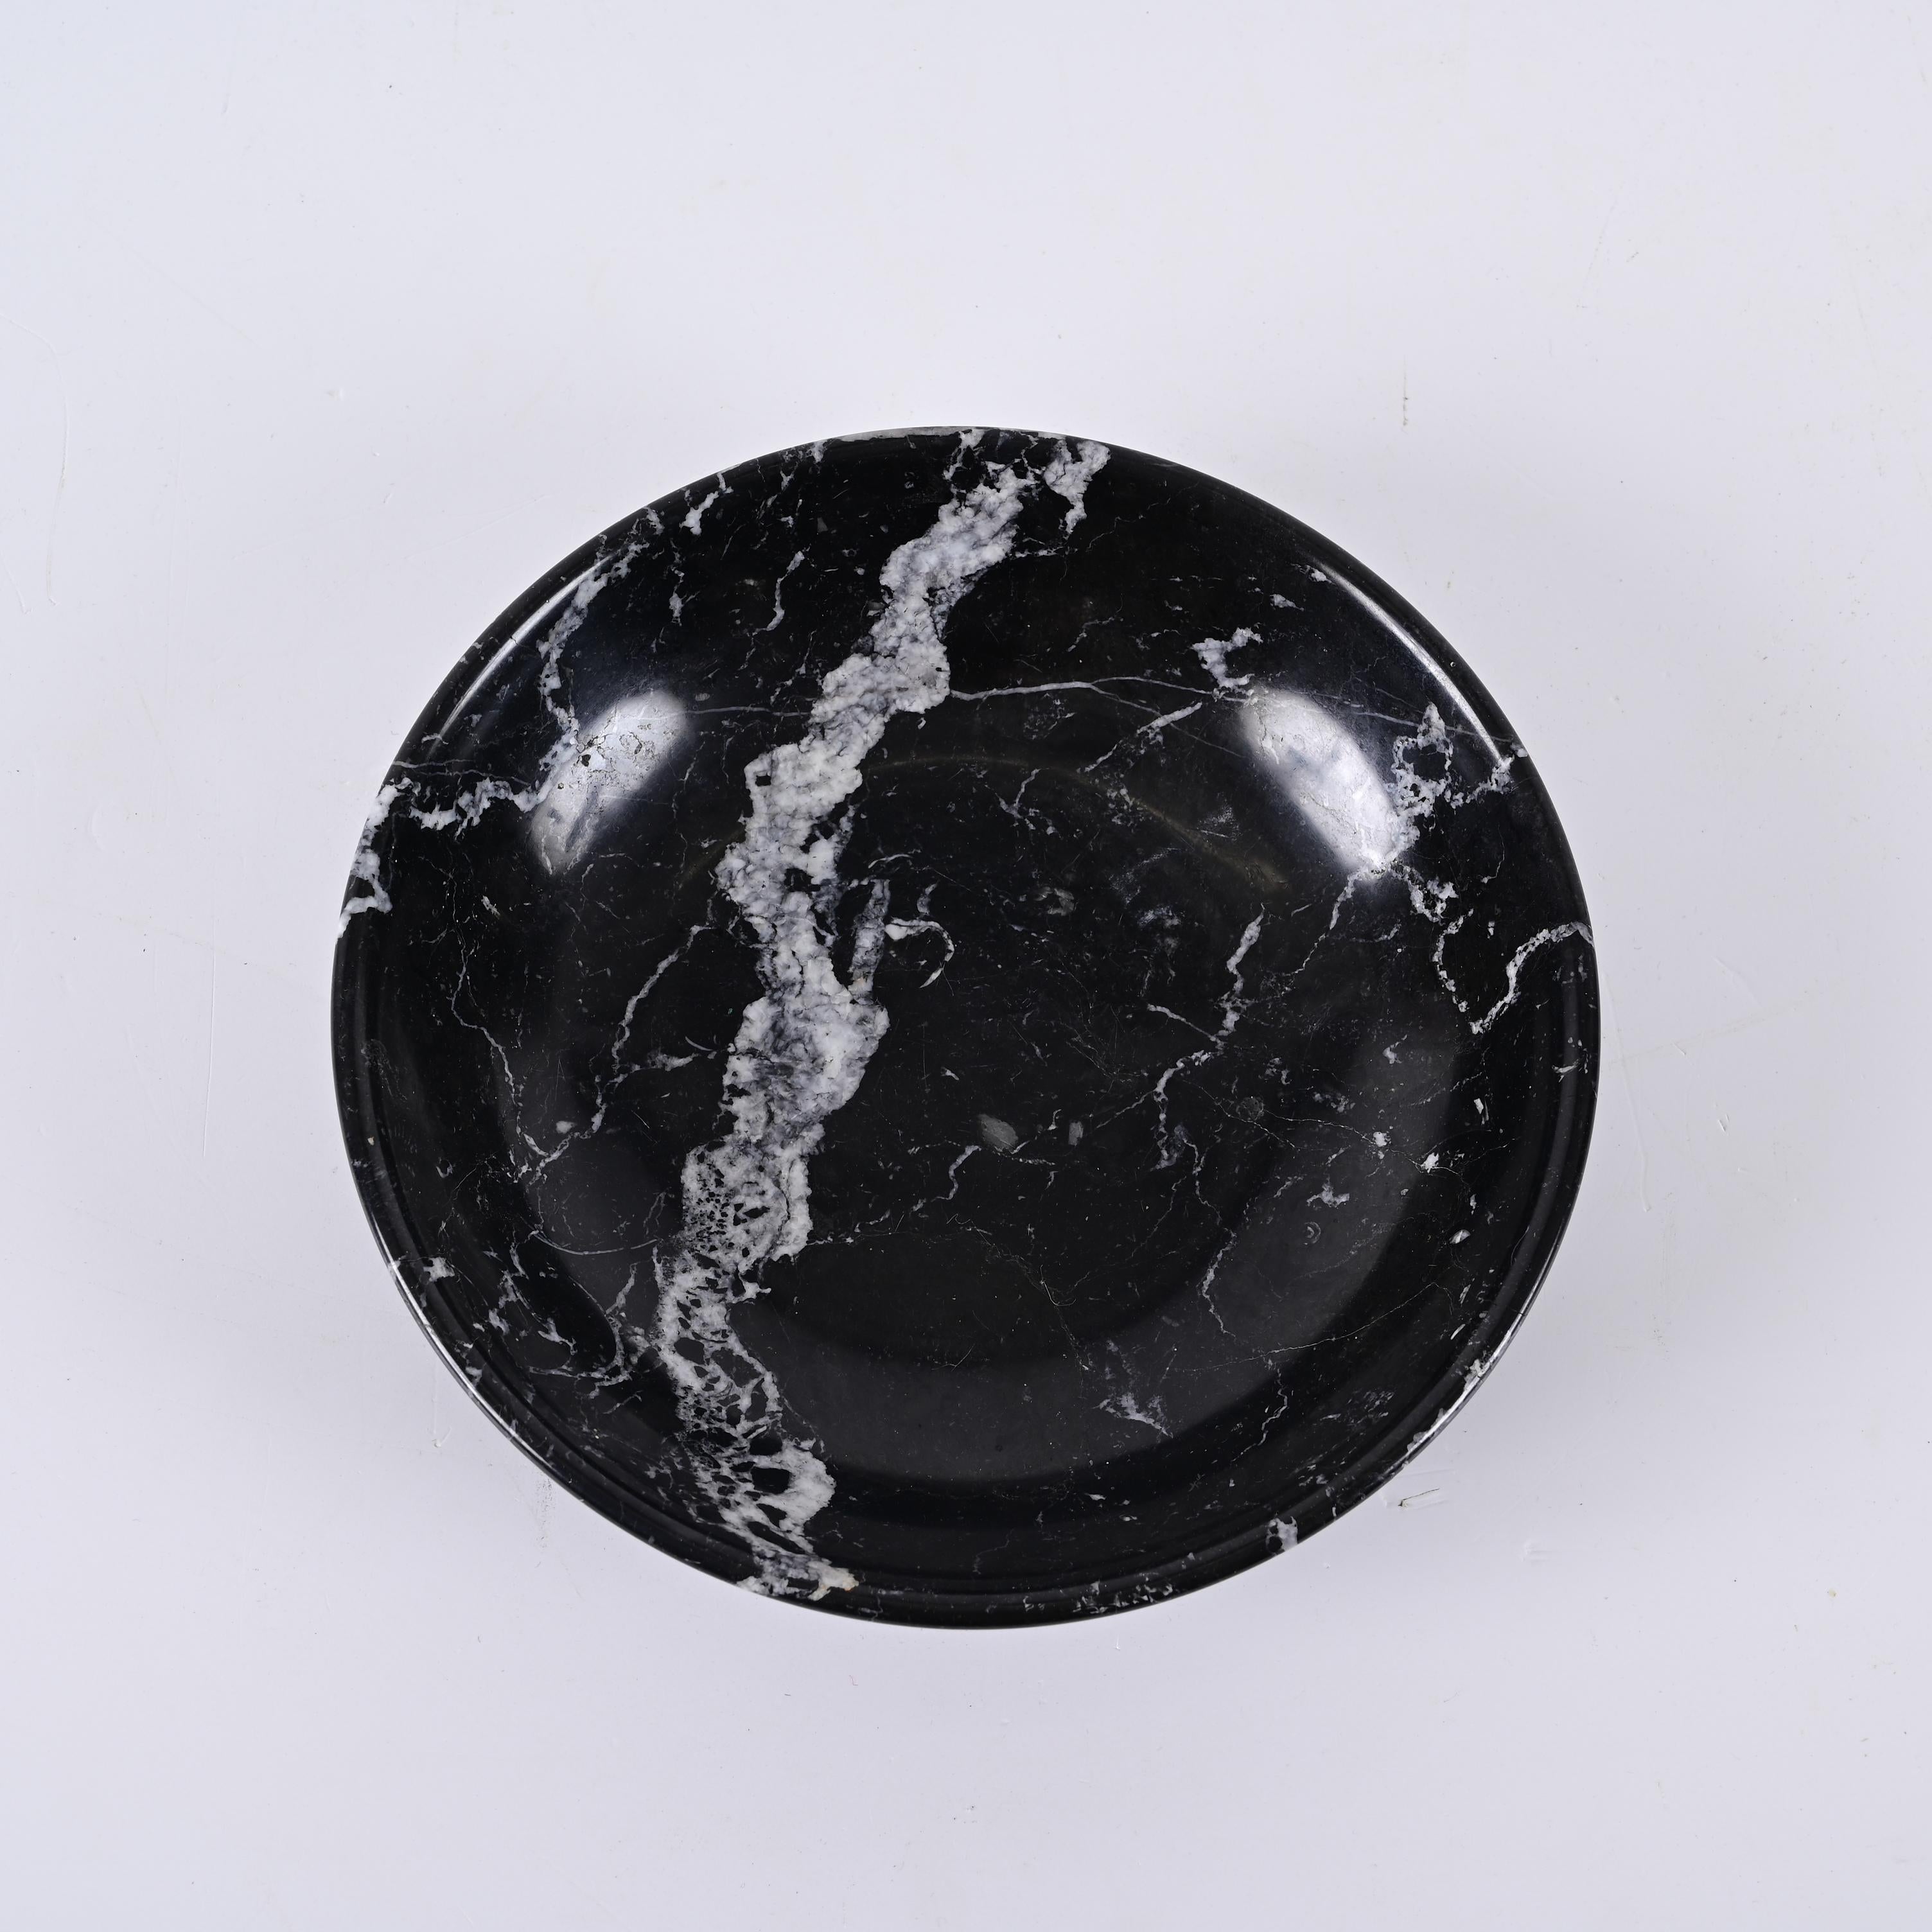 Midcentury Black Marble with White Grains Round Italian Decorative Bowl, 1950s For Sale 1